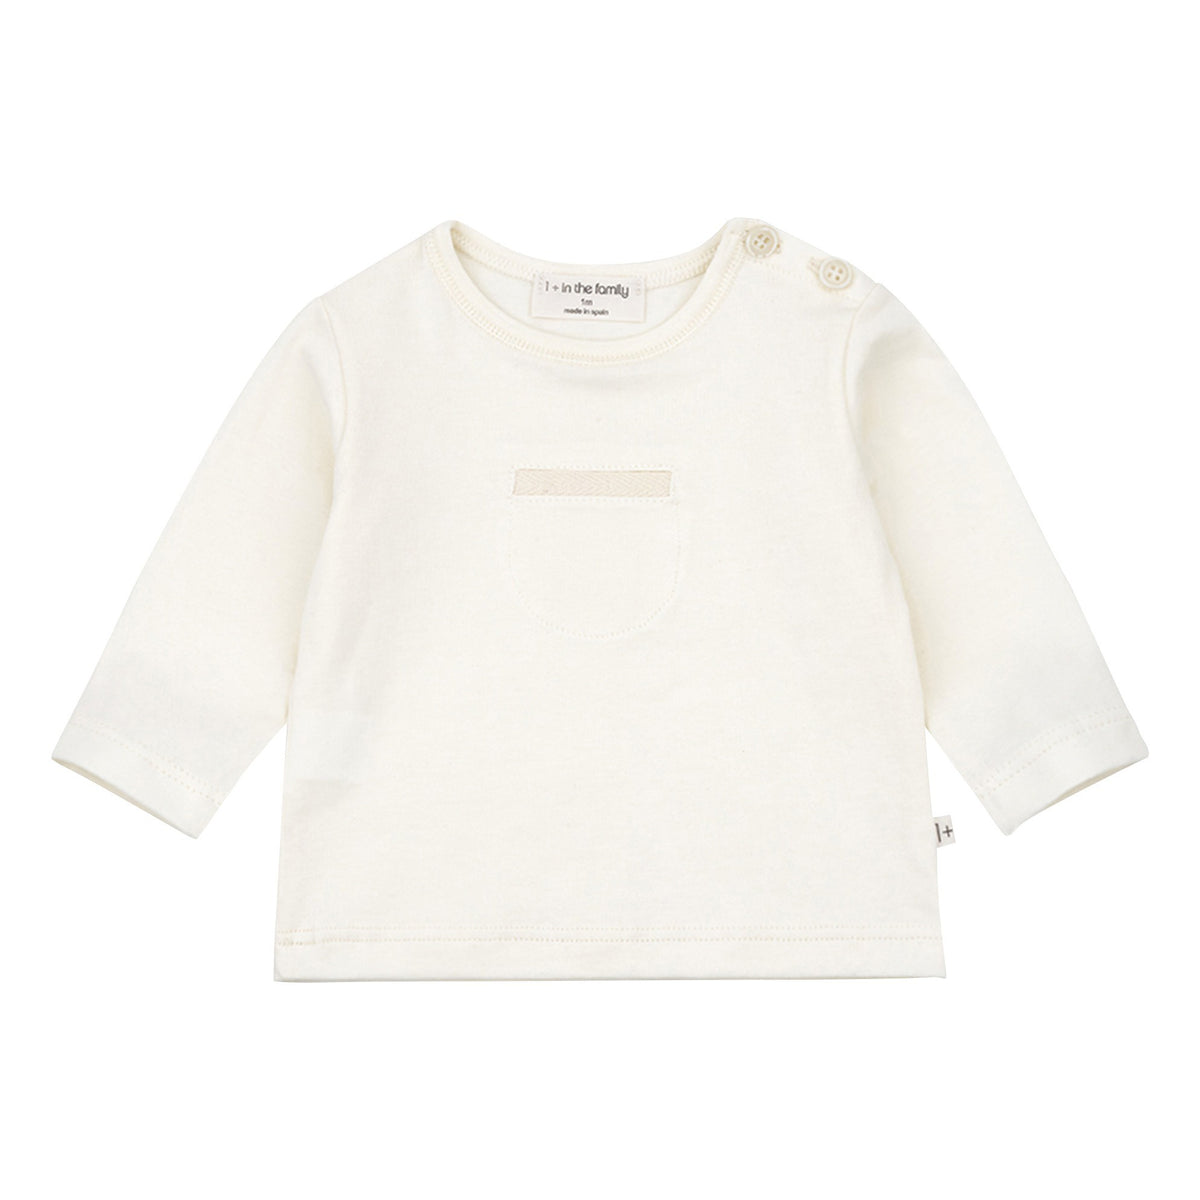 White top with shoulder buttons for baby